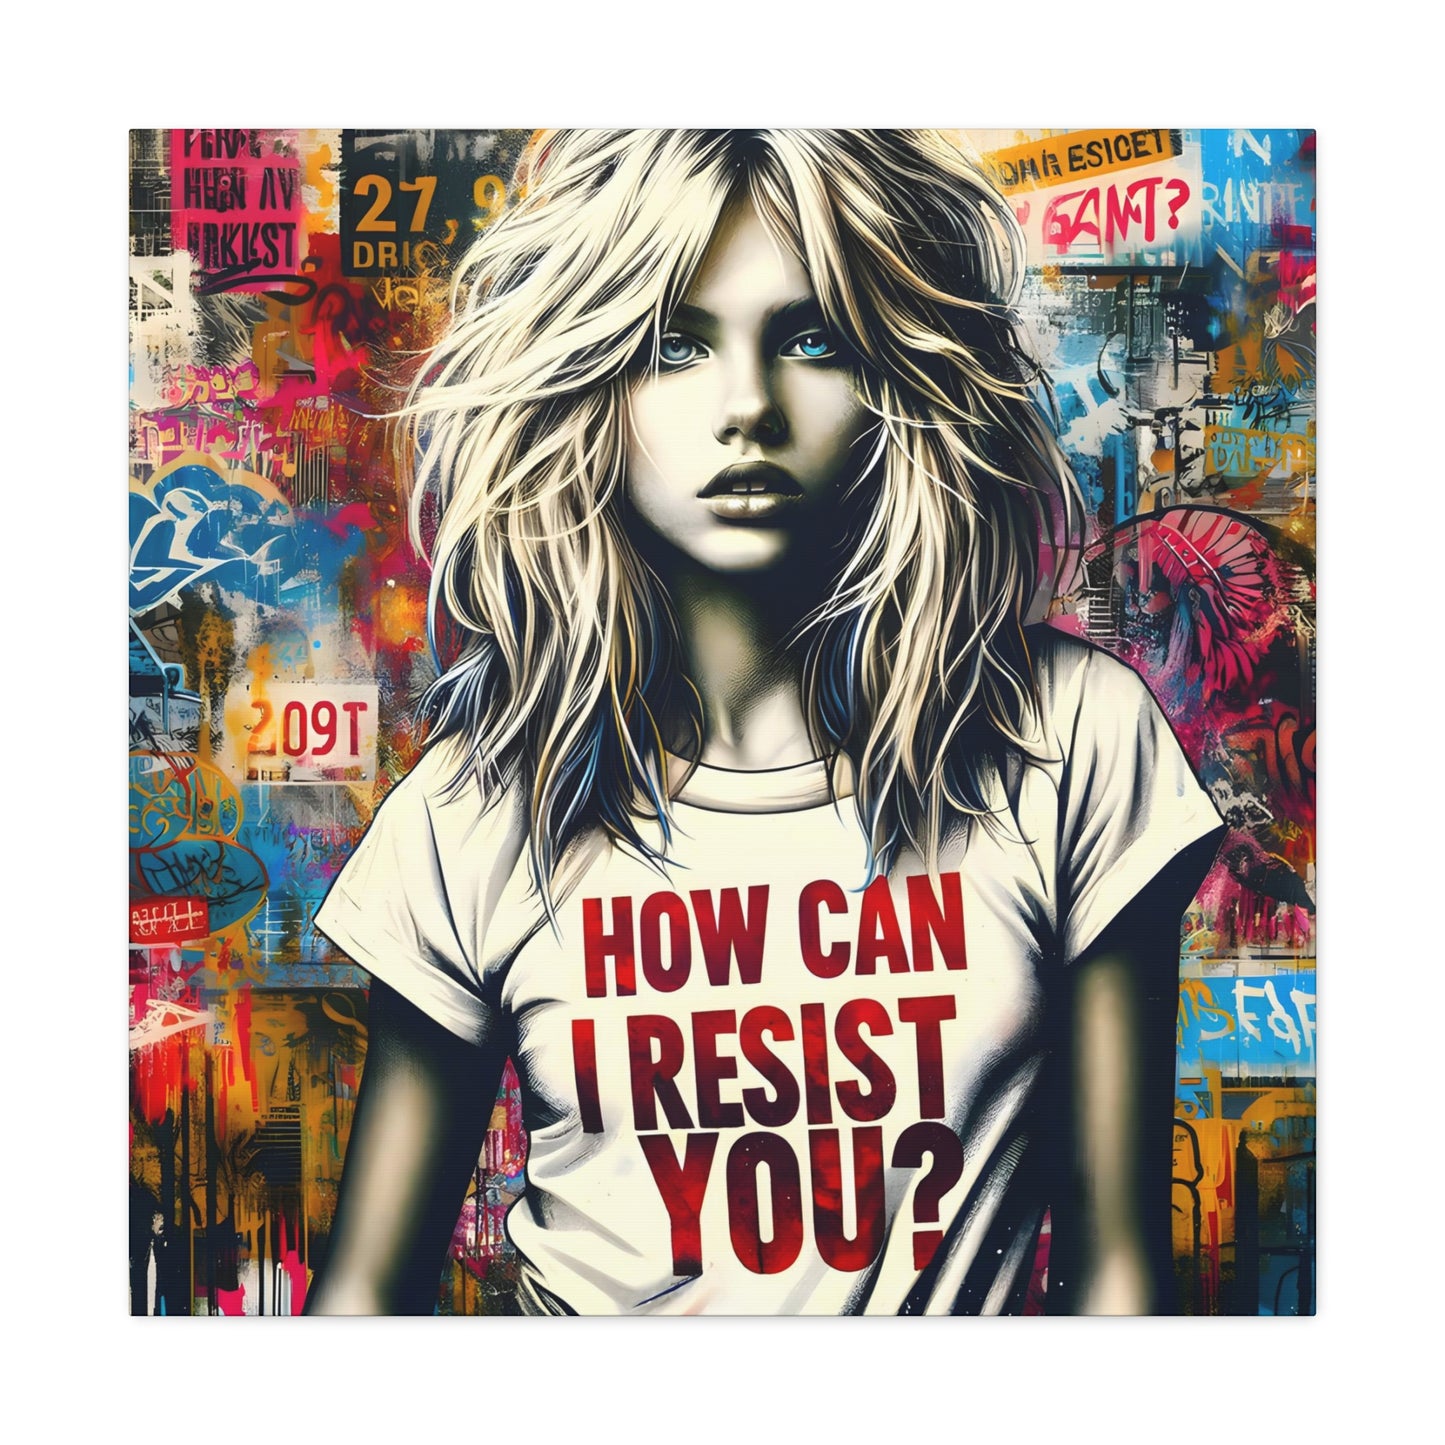 square canvas AI-generated art, 'Resist You? – An ABBA Echo,' with a modern Aphrodite in urban setting, her shirt reading 'HOW CAN I RESIST YOU?' amidst colorful graffiti, echoing ABBA's themes.